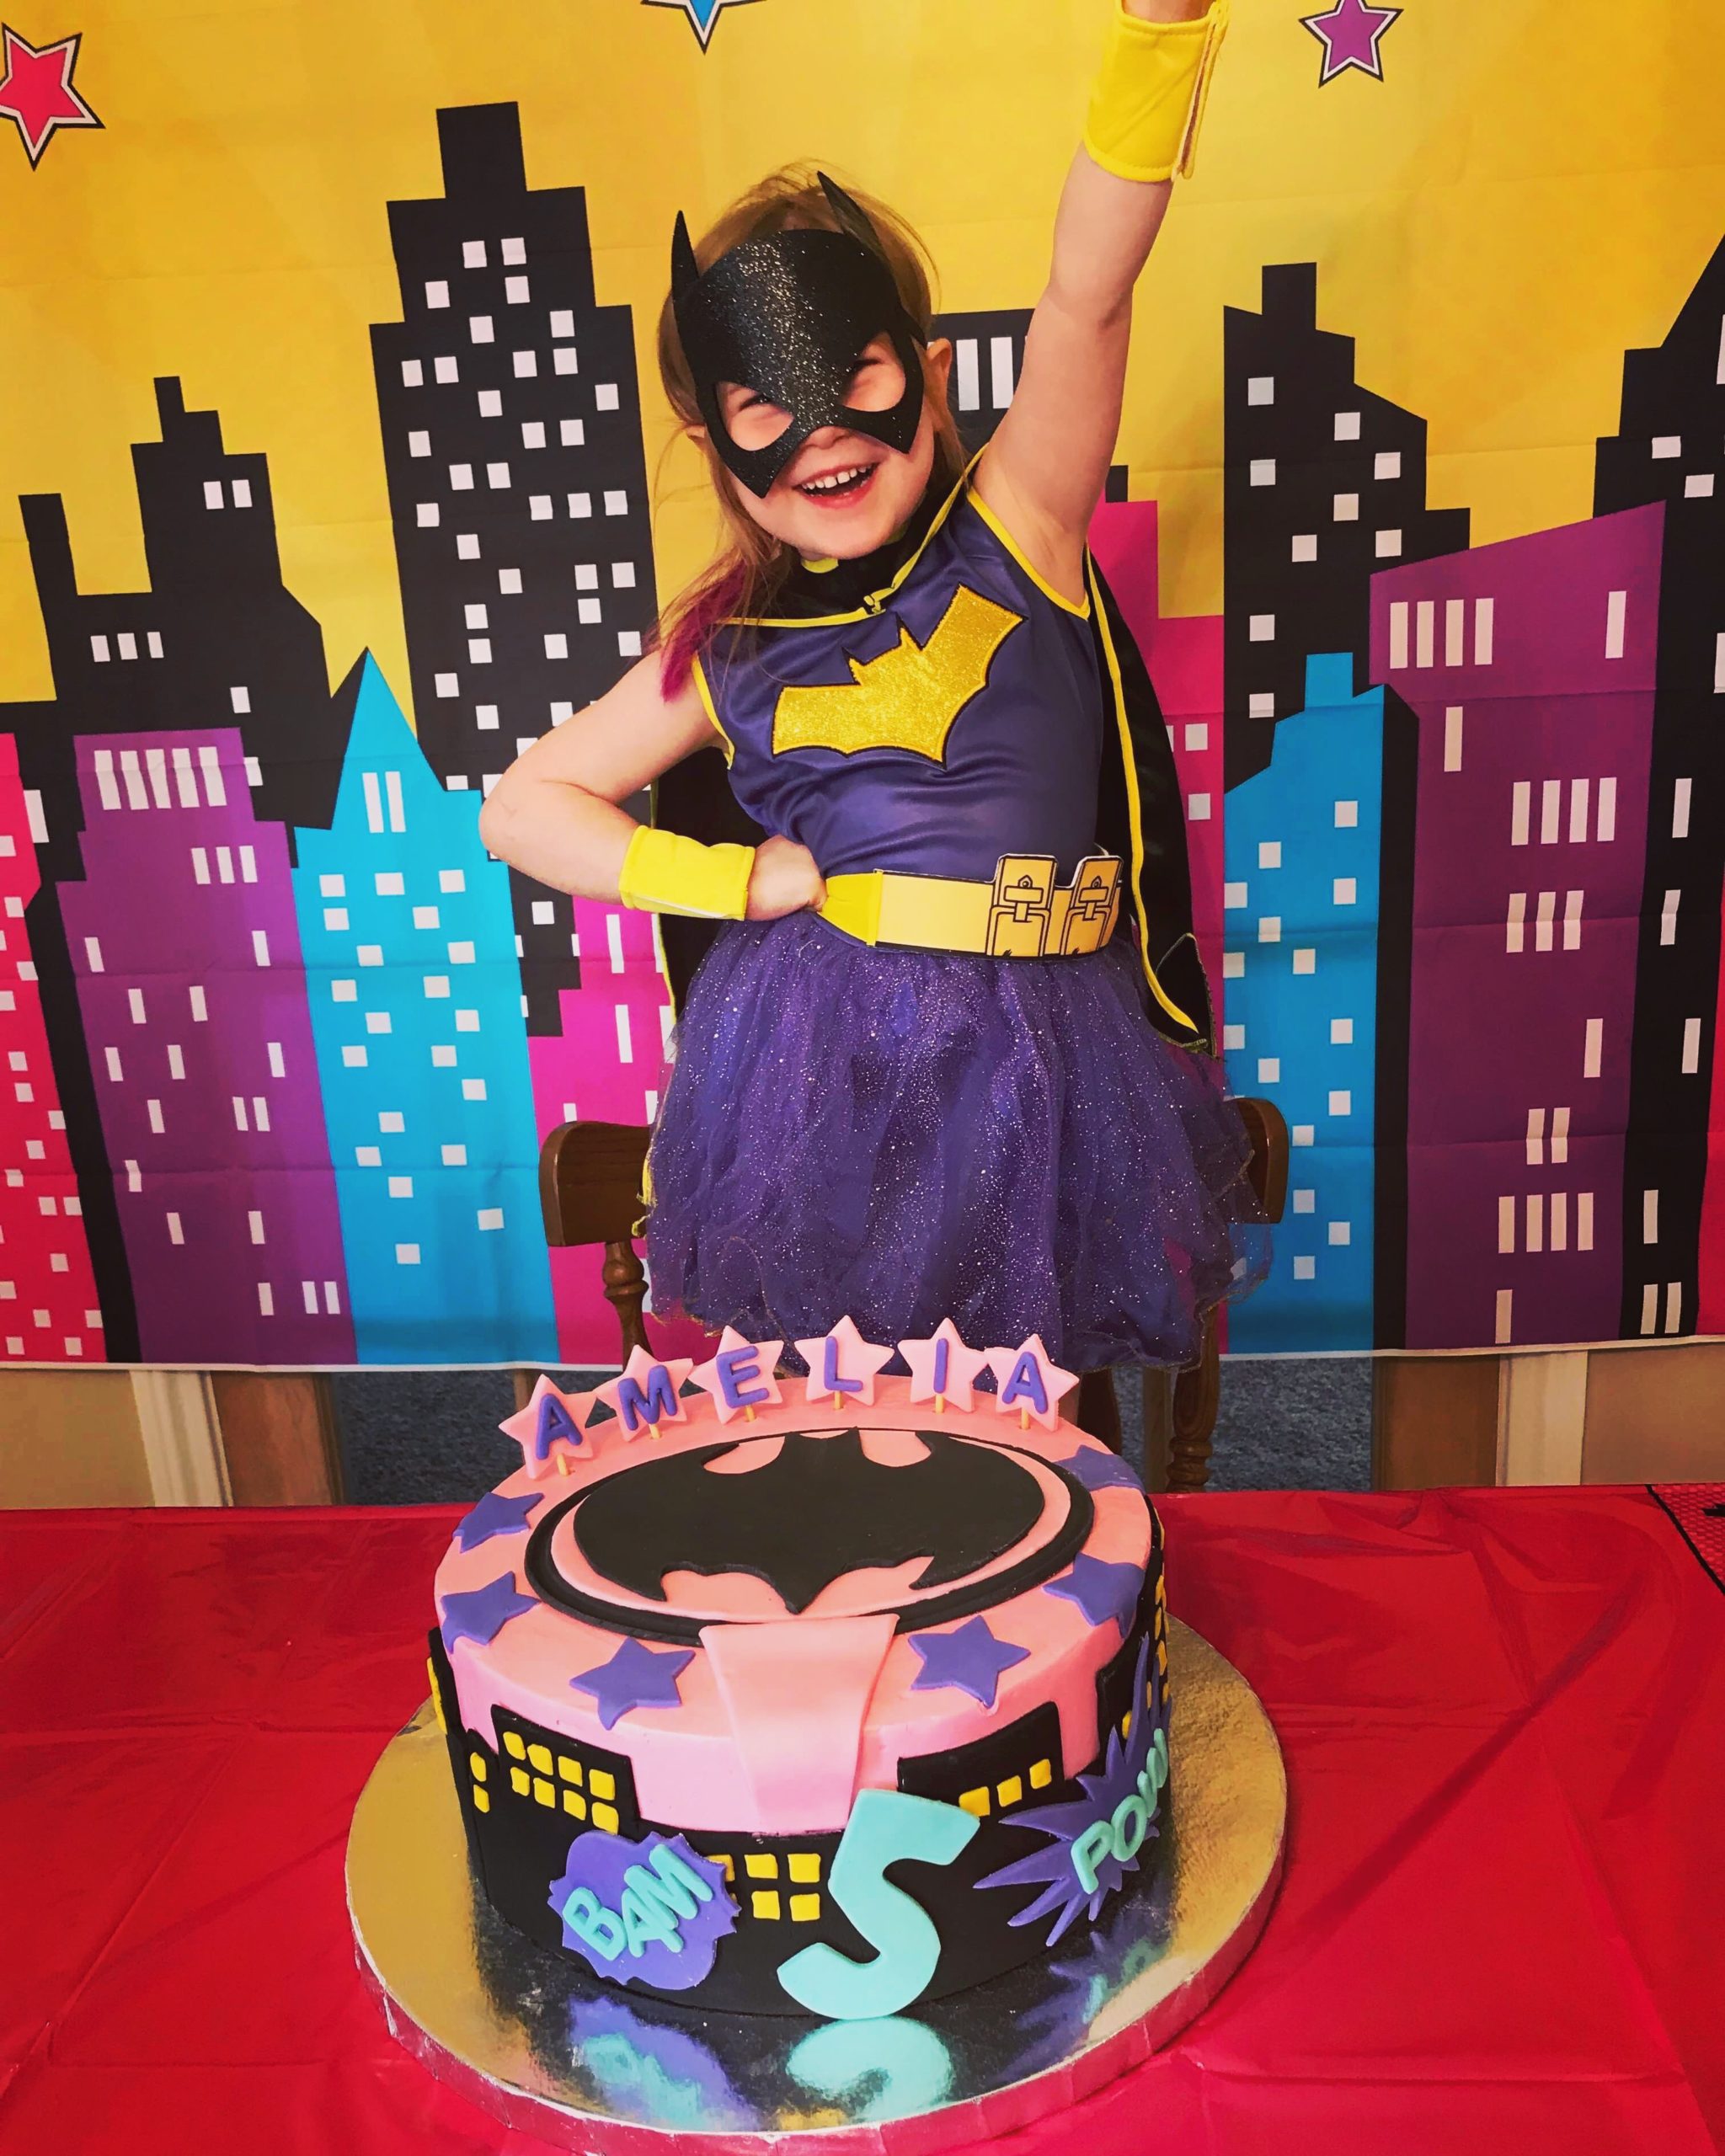 A fantastic super hero themed birthday cake with hand-crafted fondant decorations from Village Patisserie in Toledo, Ohio